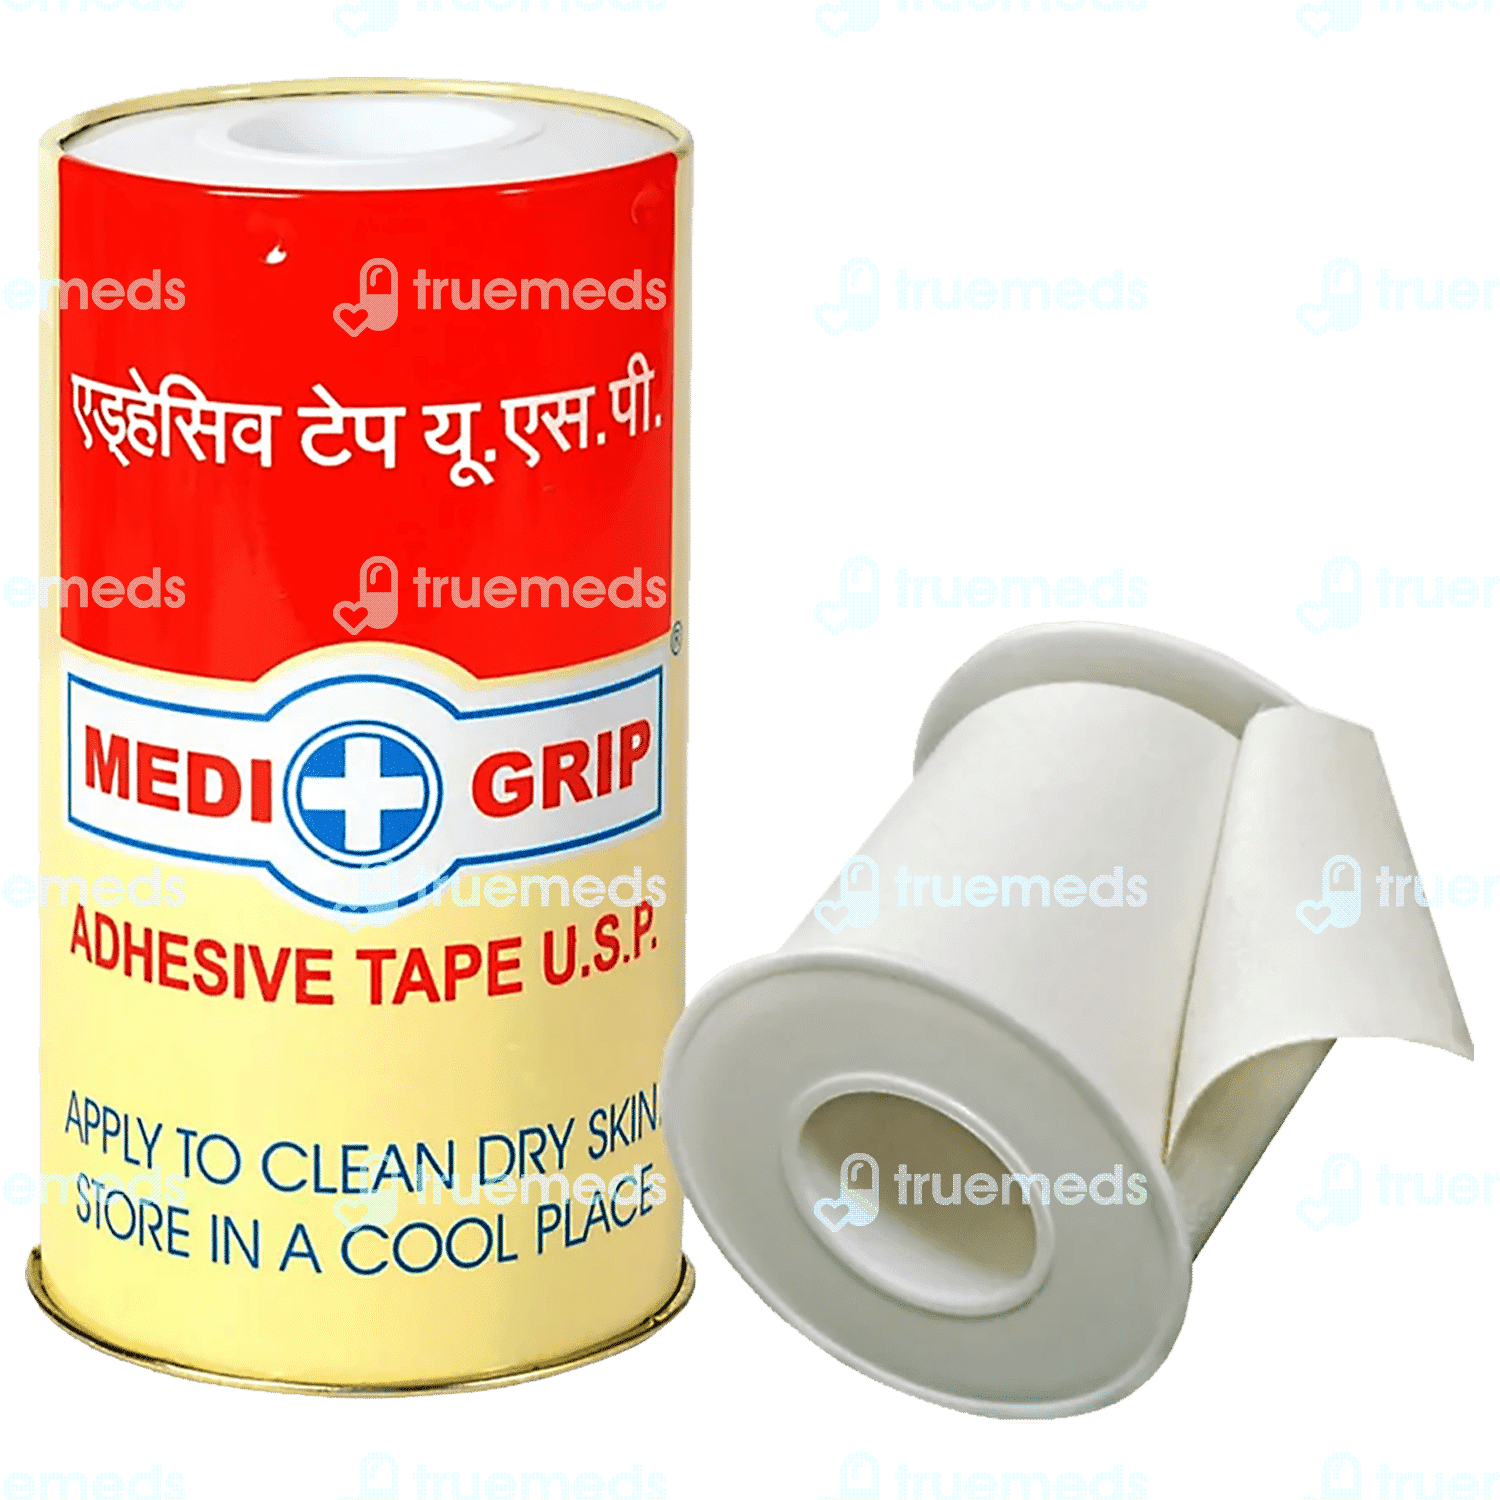 Medigrip 10 Cm X 5 M Adhesive Tape Usp 1 - Uses, Side Effects, Dosage,  Price